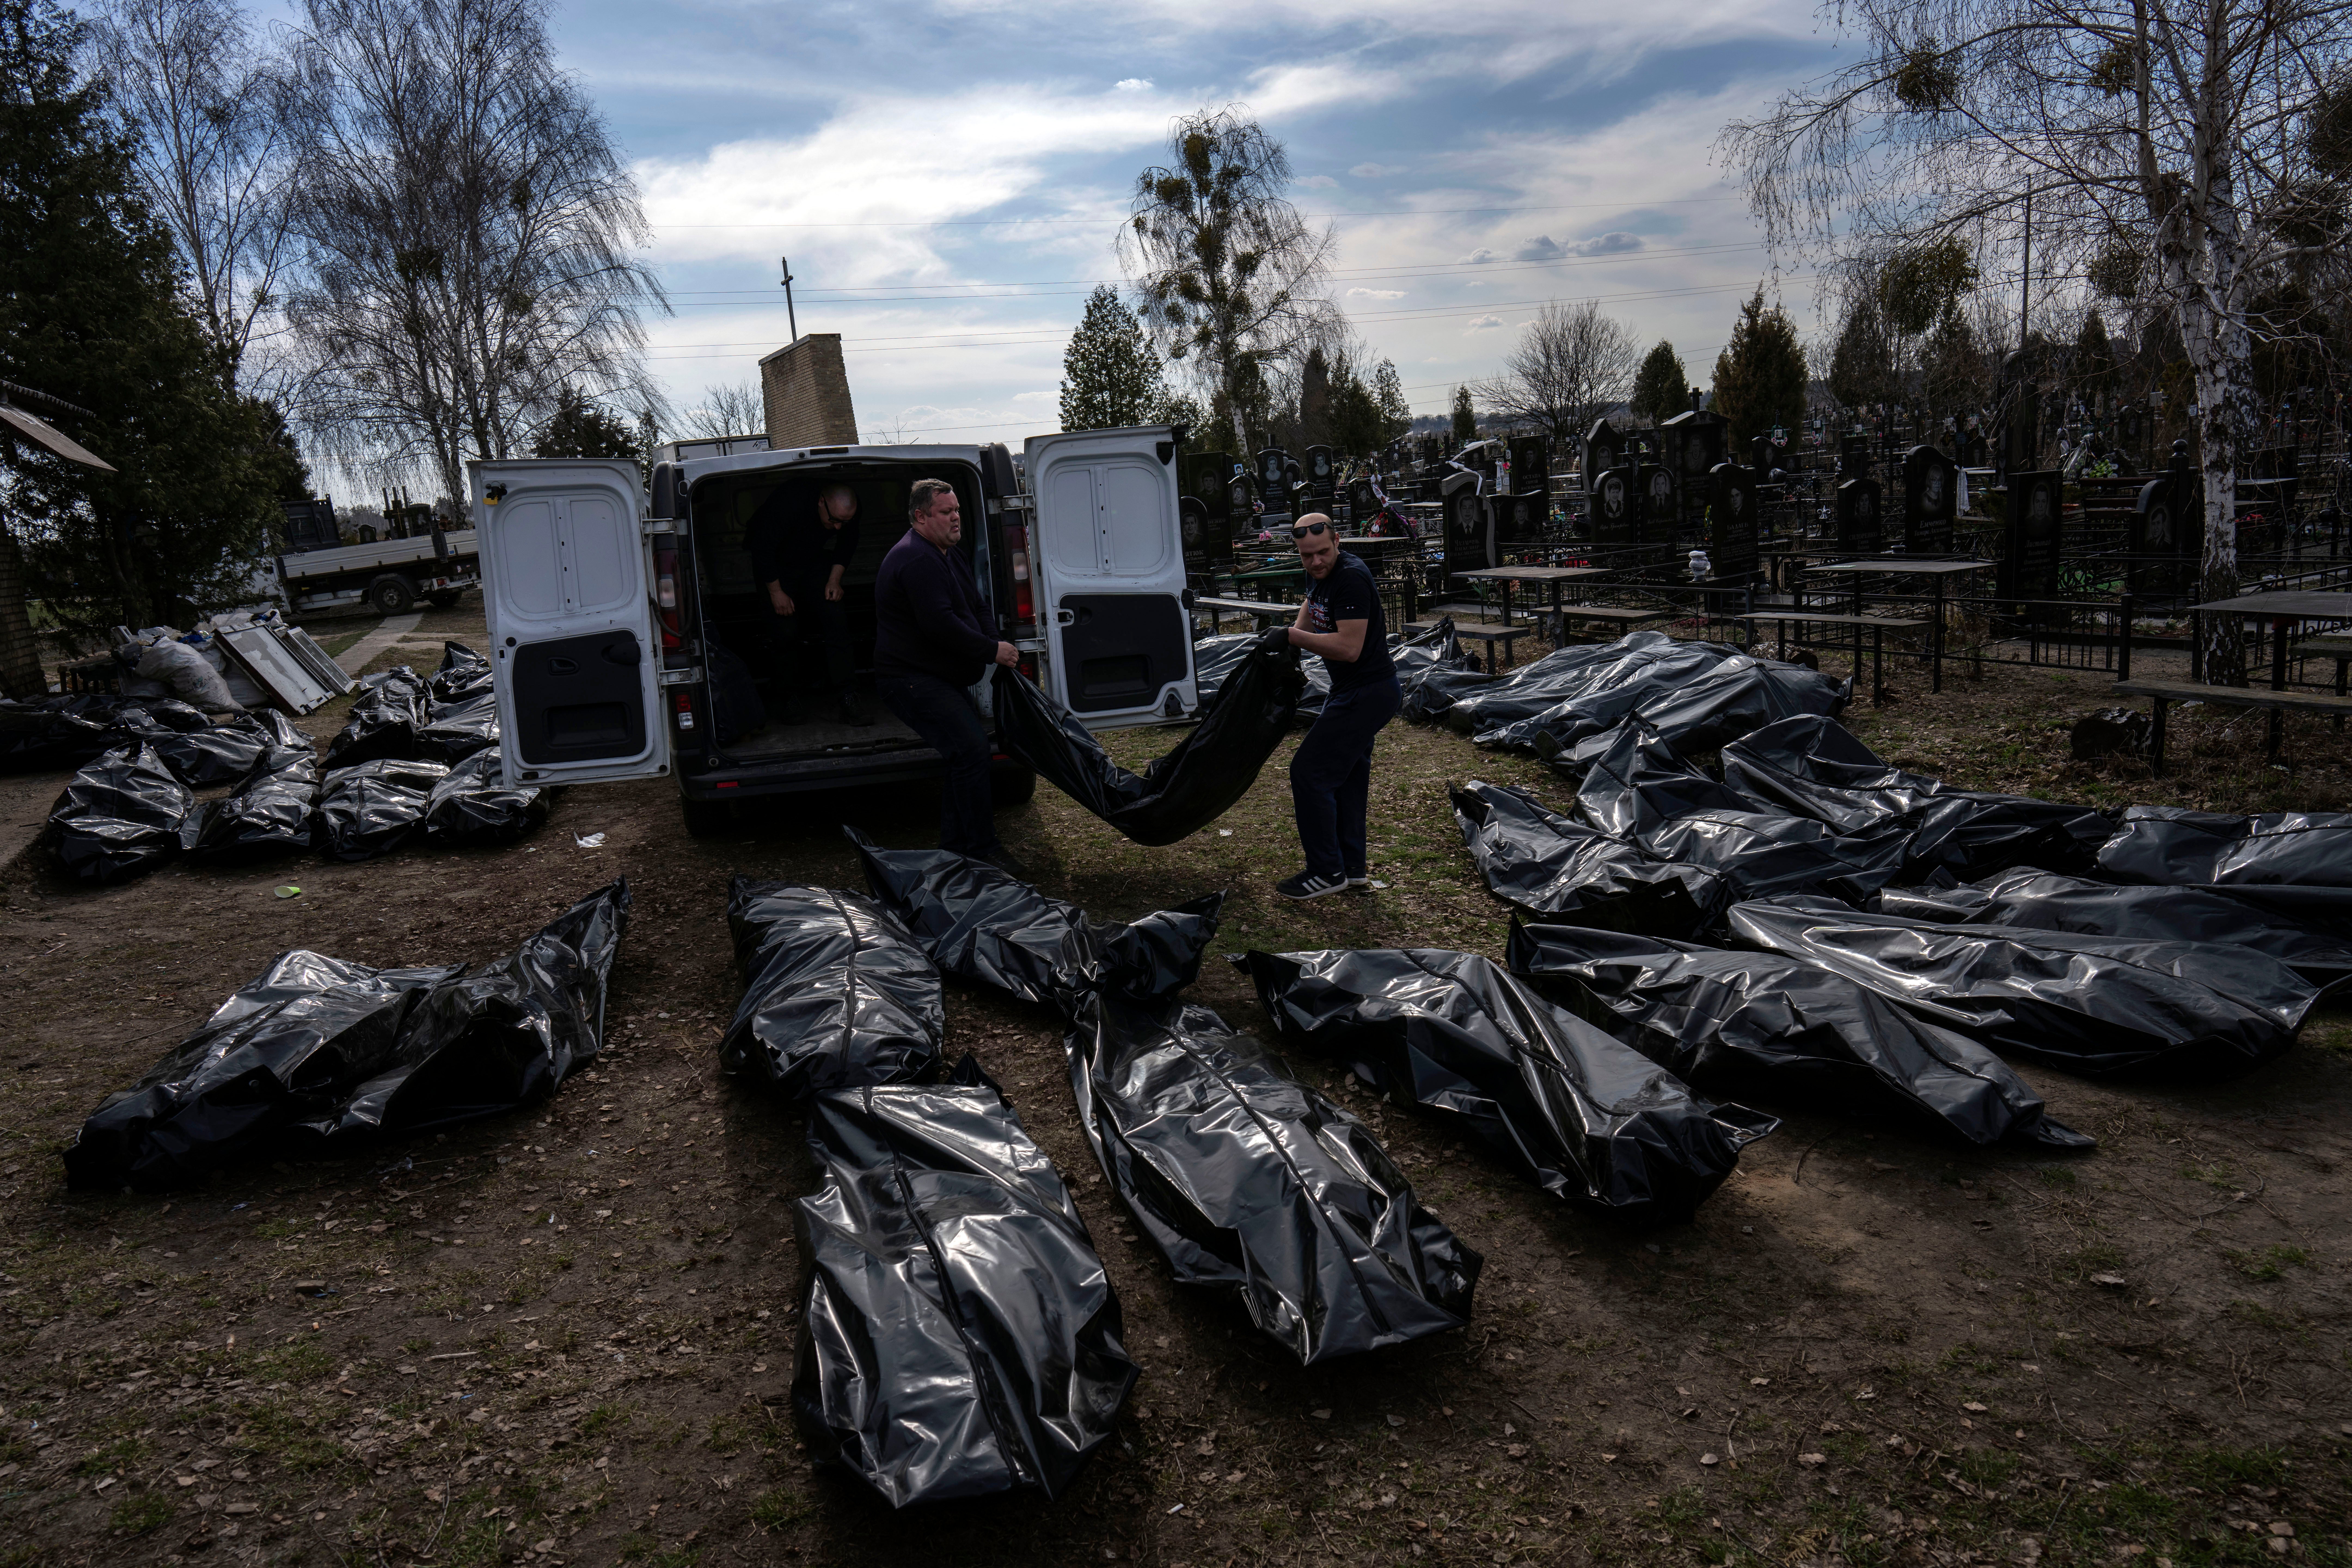 Cemetery workers unload bodies of killed civilians from a van in the cemetery in Bucha